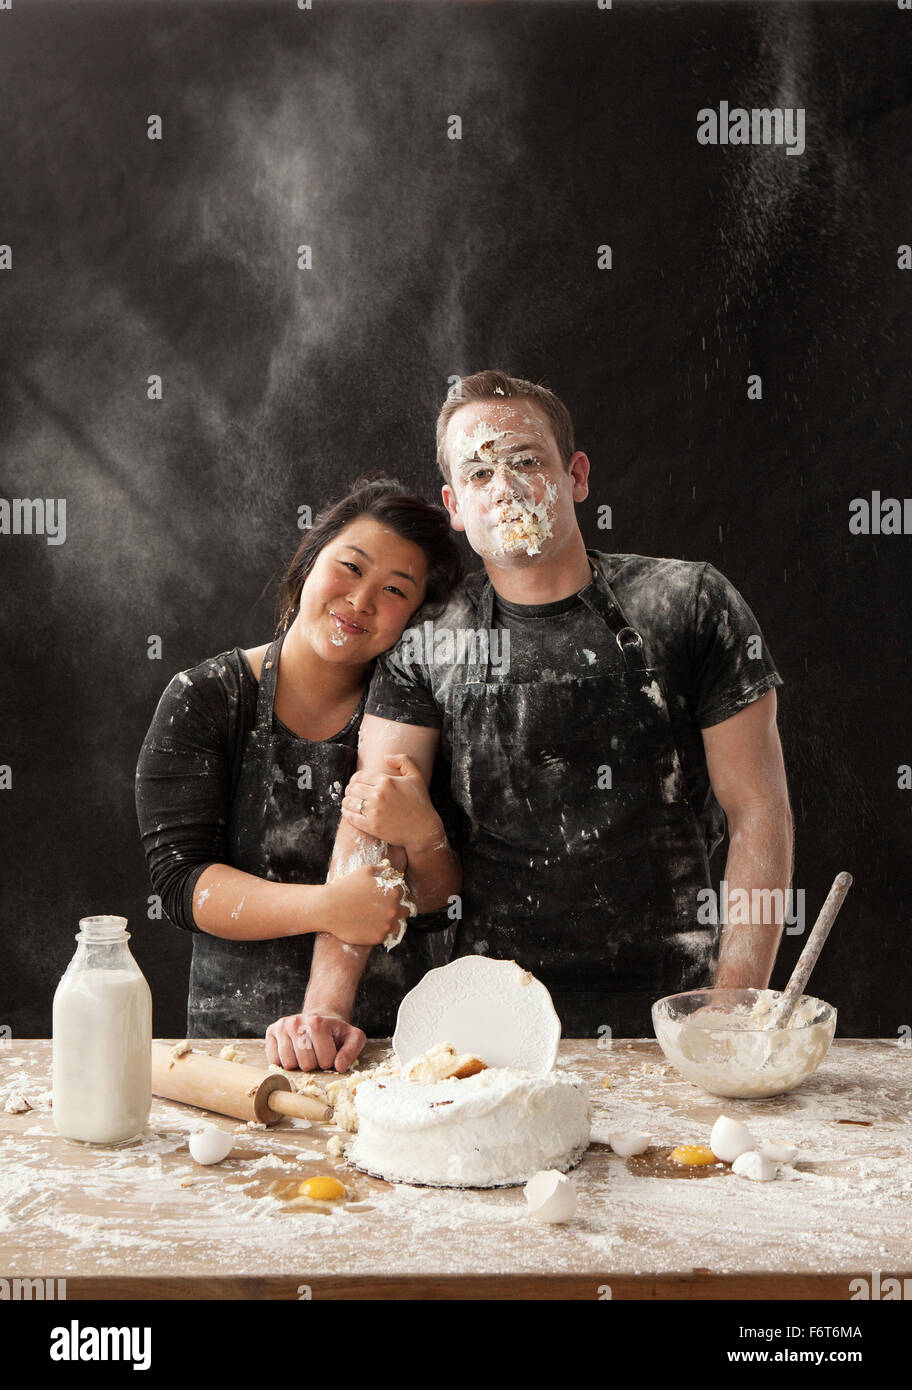 Messy couple hugging and baking Stock Photo